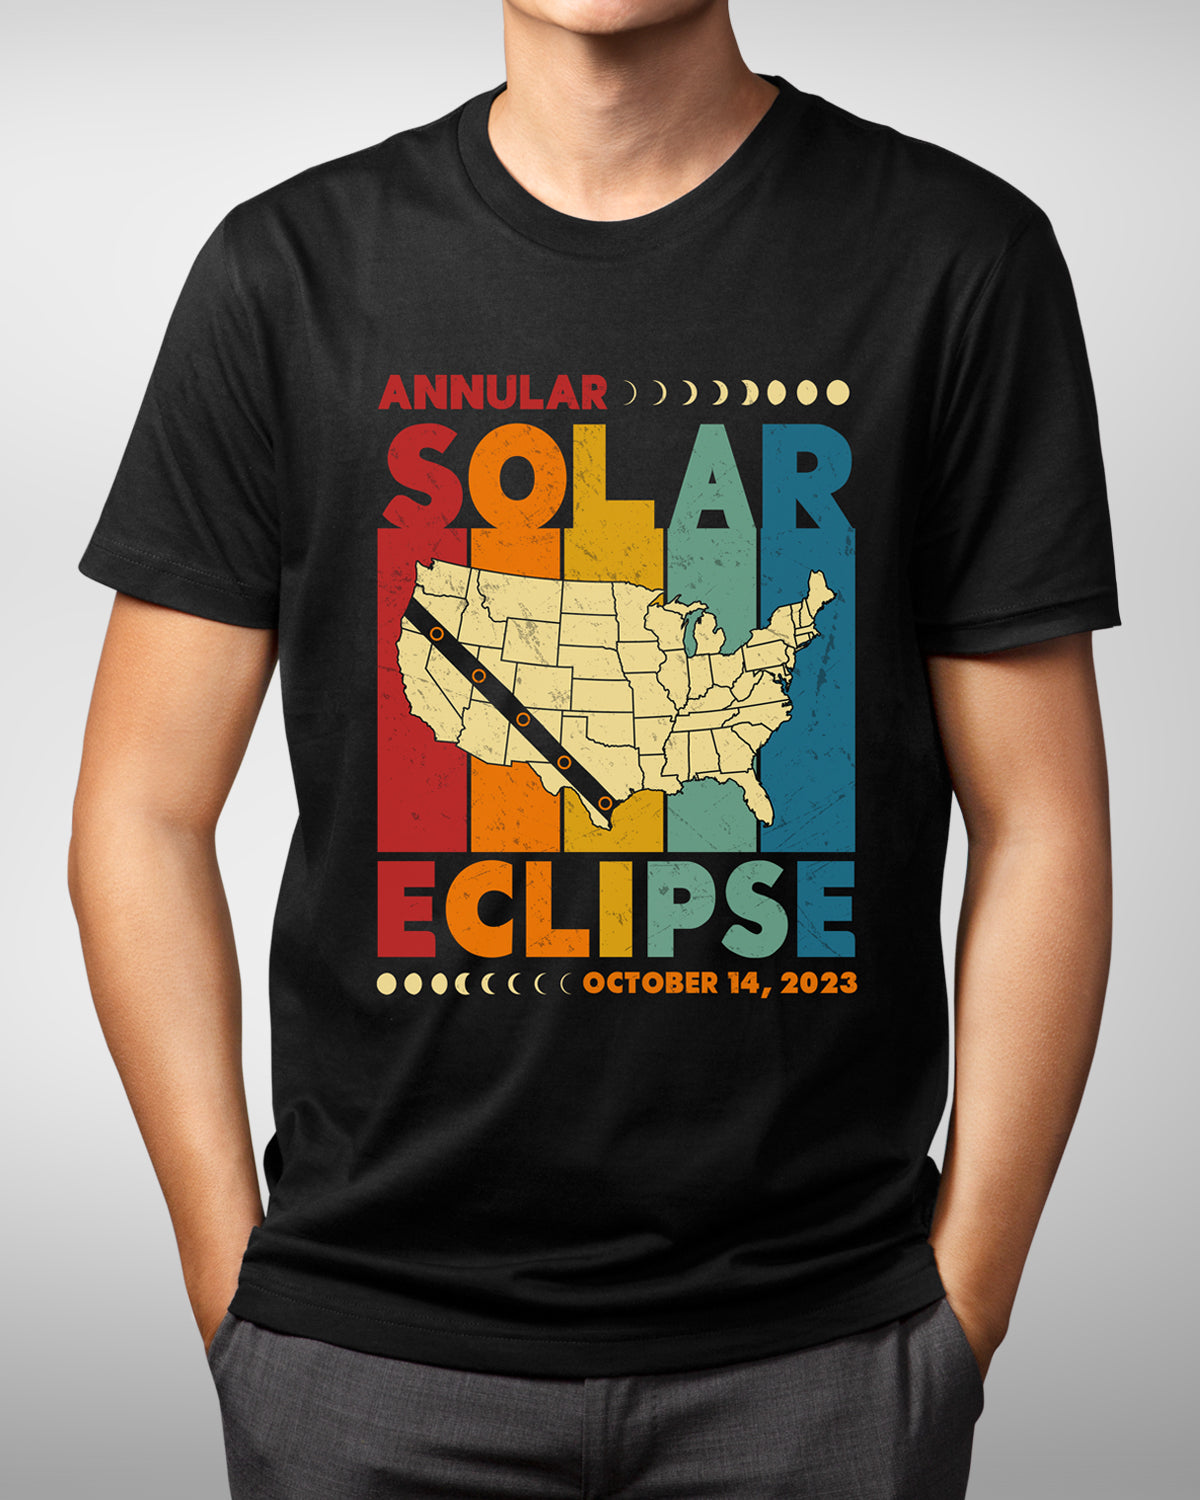 Annular Solar Eclipse 2023 Shirt - America's Ring of Fire - Vintage Eclipse Gift